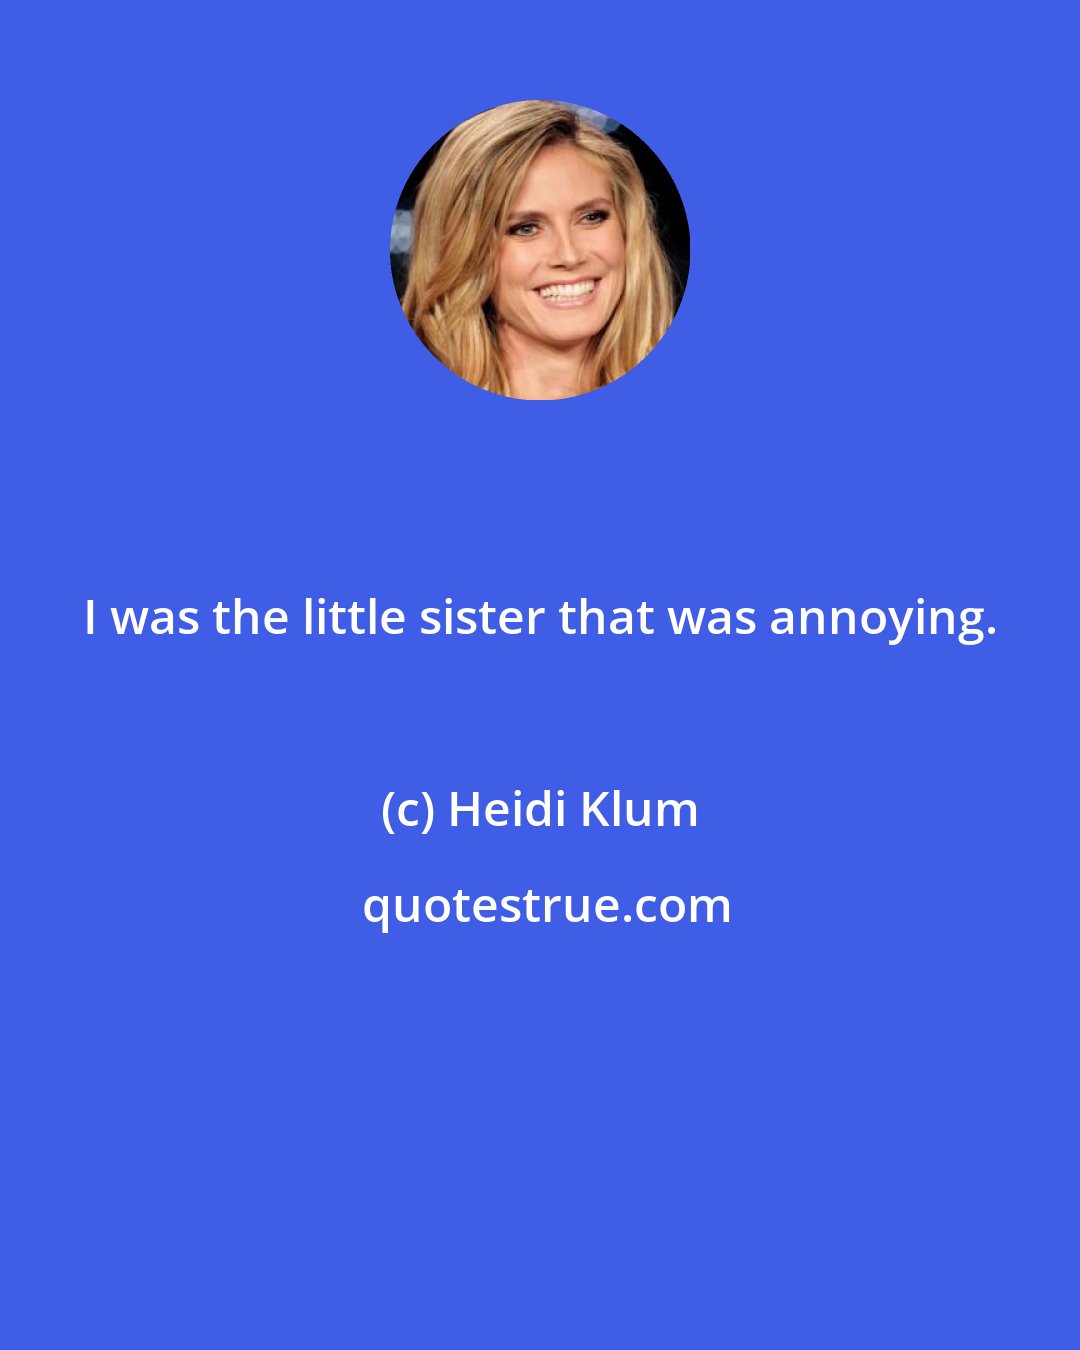 Heidi Klum: I was the little sister that was annoying.